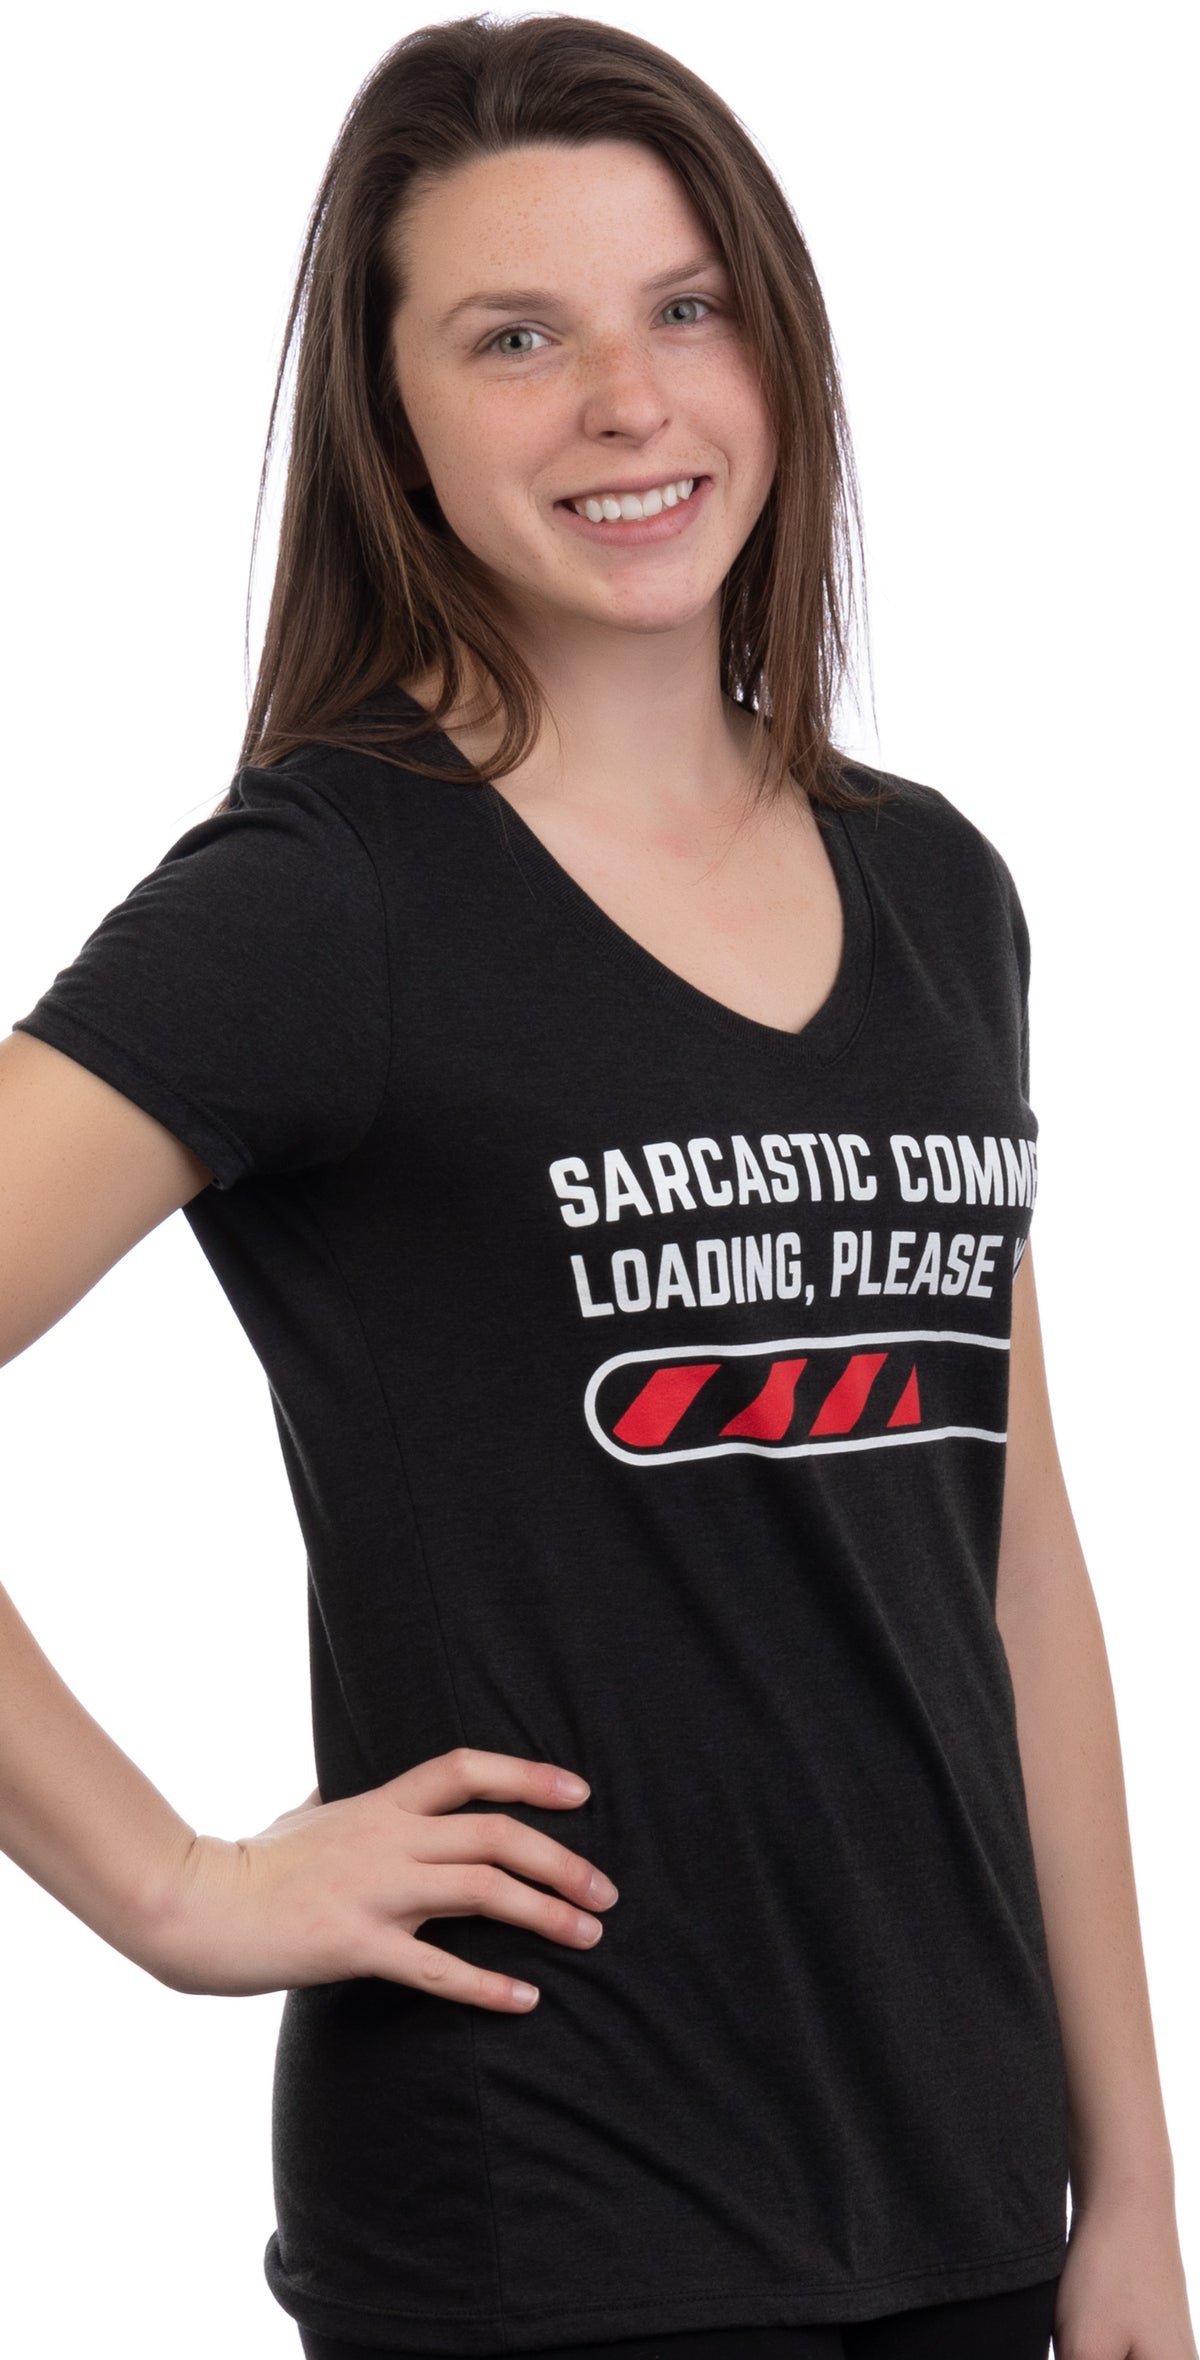 Sarcastic Comment Loading Please Wait Funny Sarcasm Humor for Women T-shirt Top